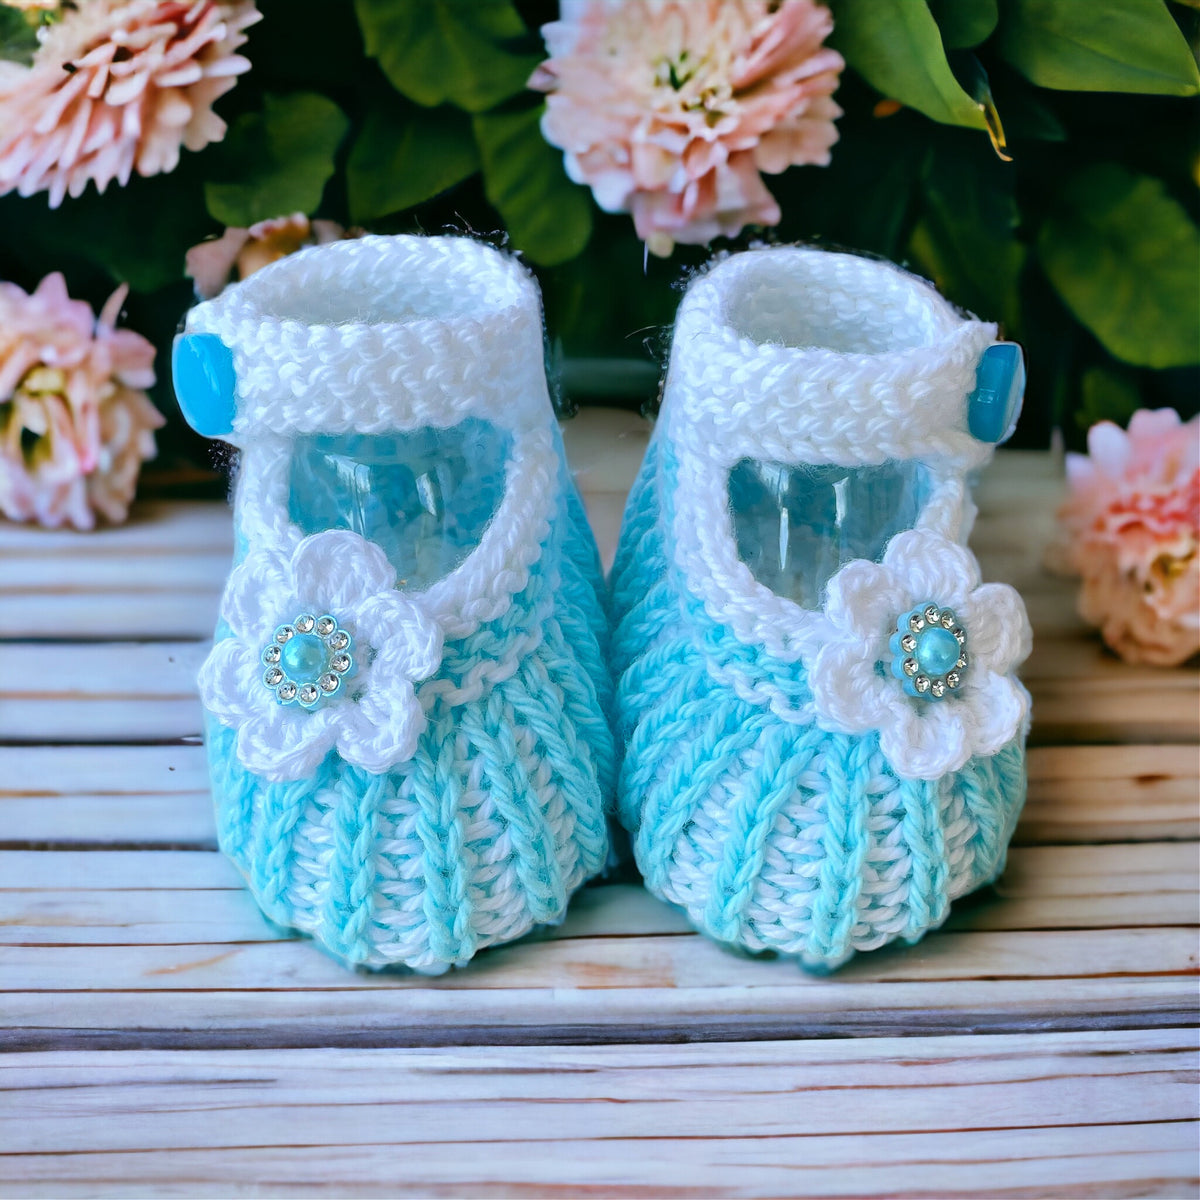 Cotton Knitted Baby Booties in Turquoise and White, Daisy Booties with rhinestones